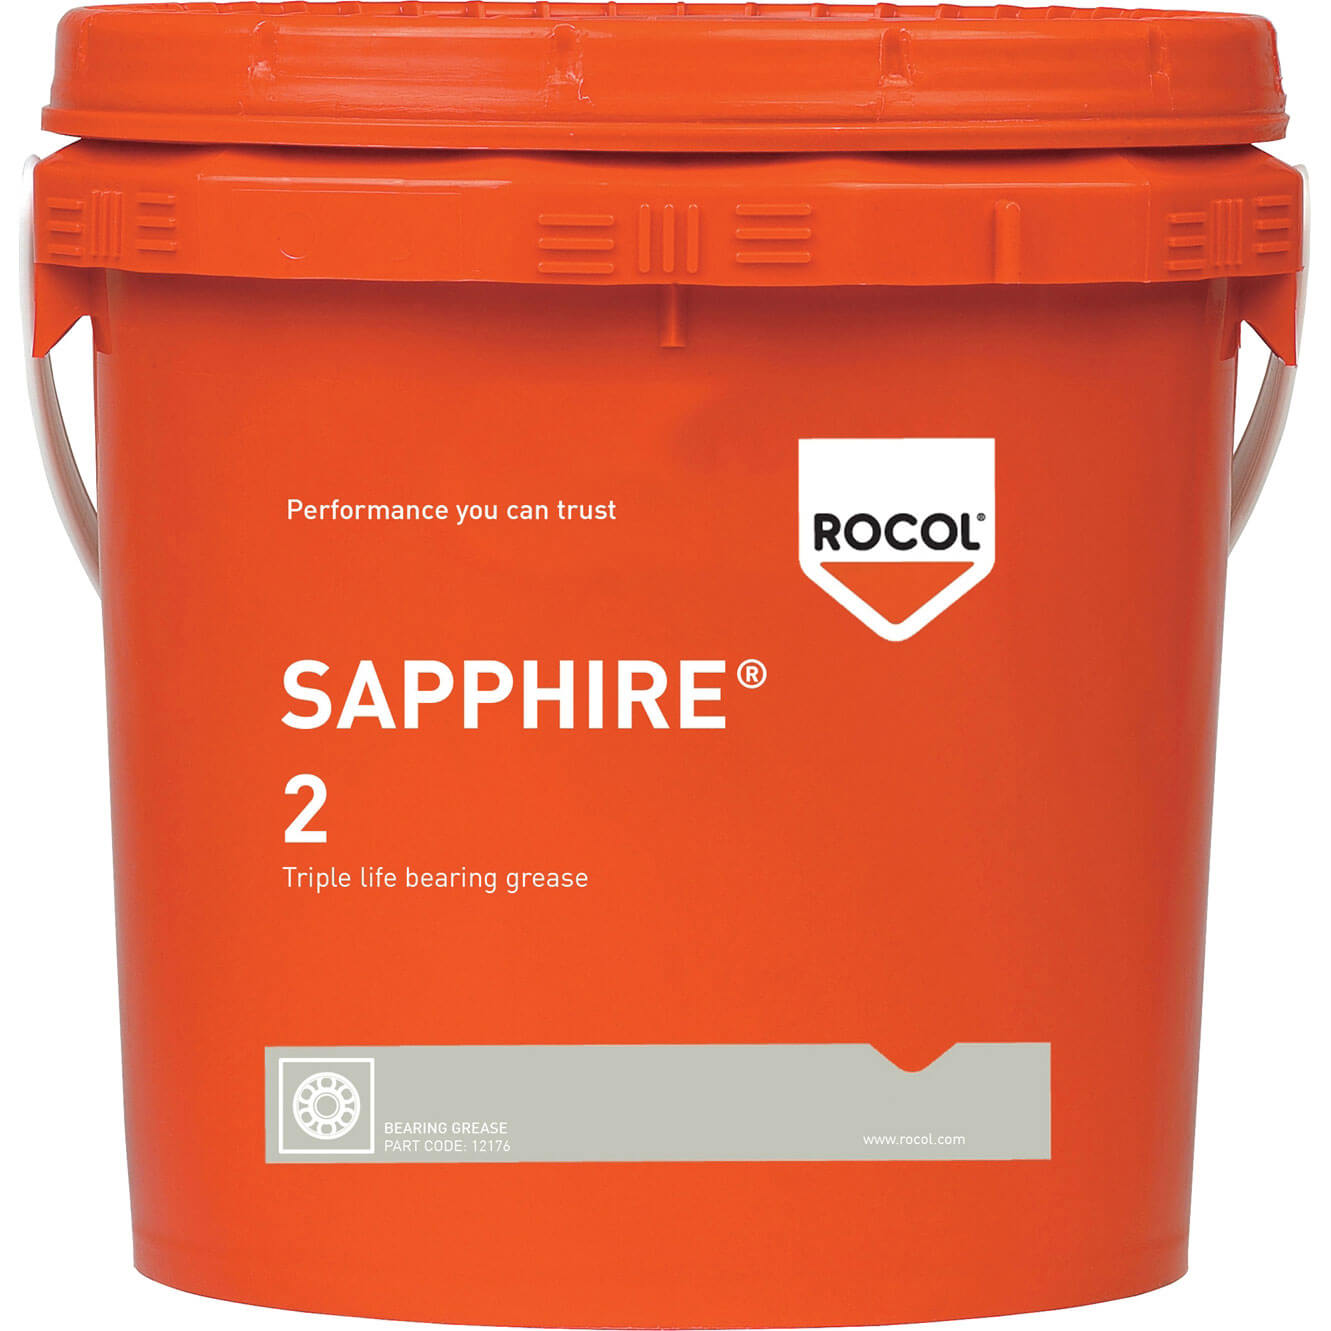 Image of Rocol Sapphire 2 Bearing Grease 5kg